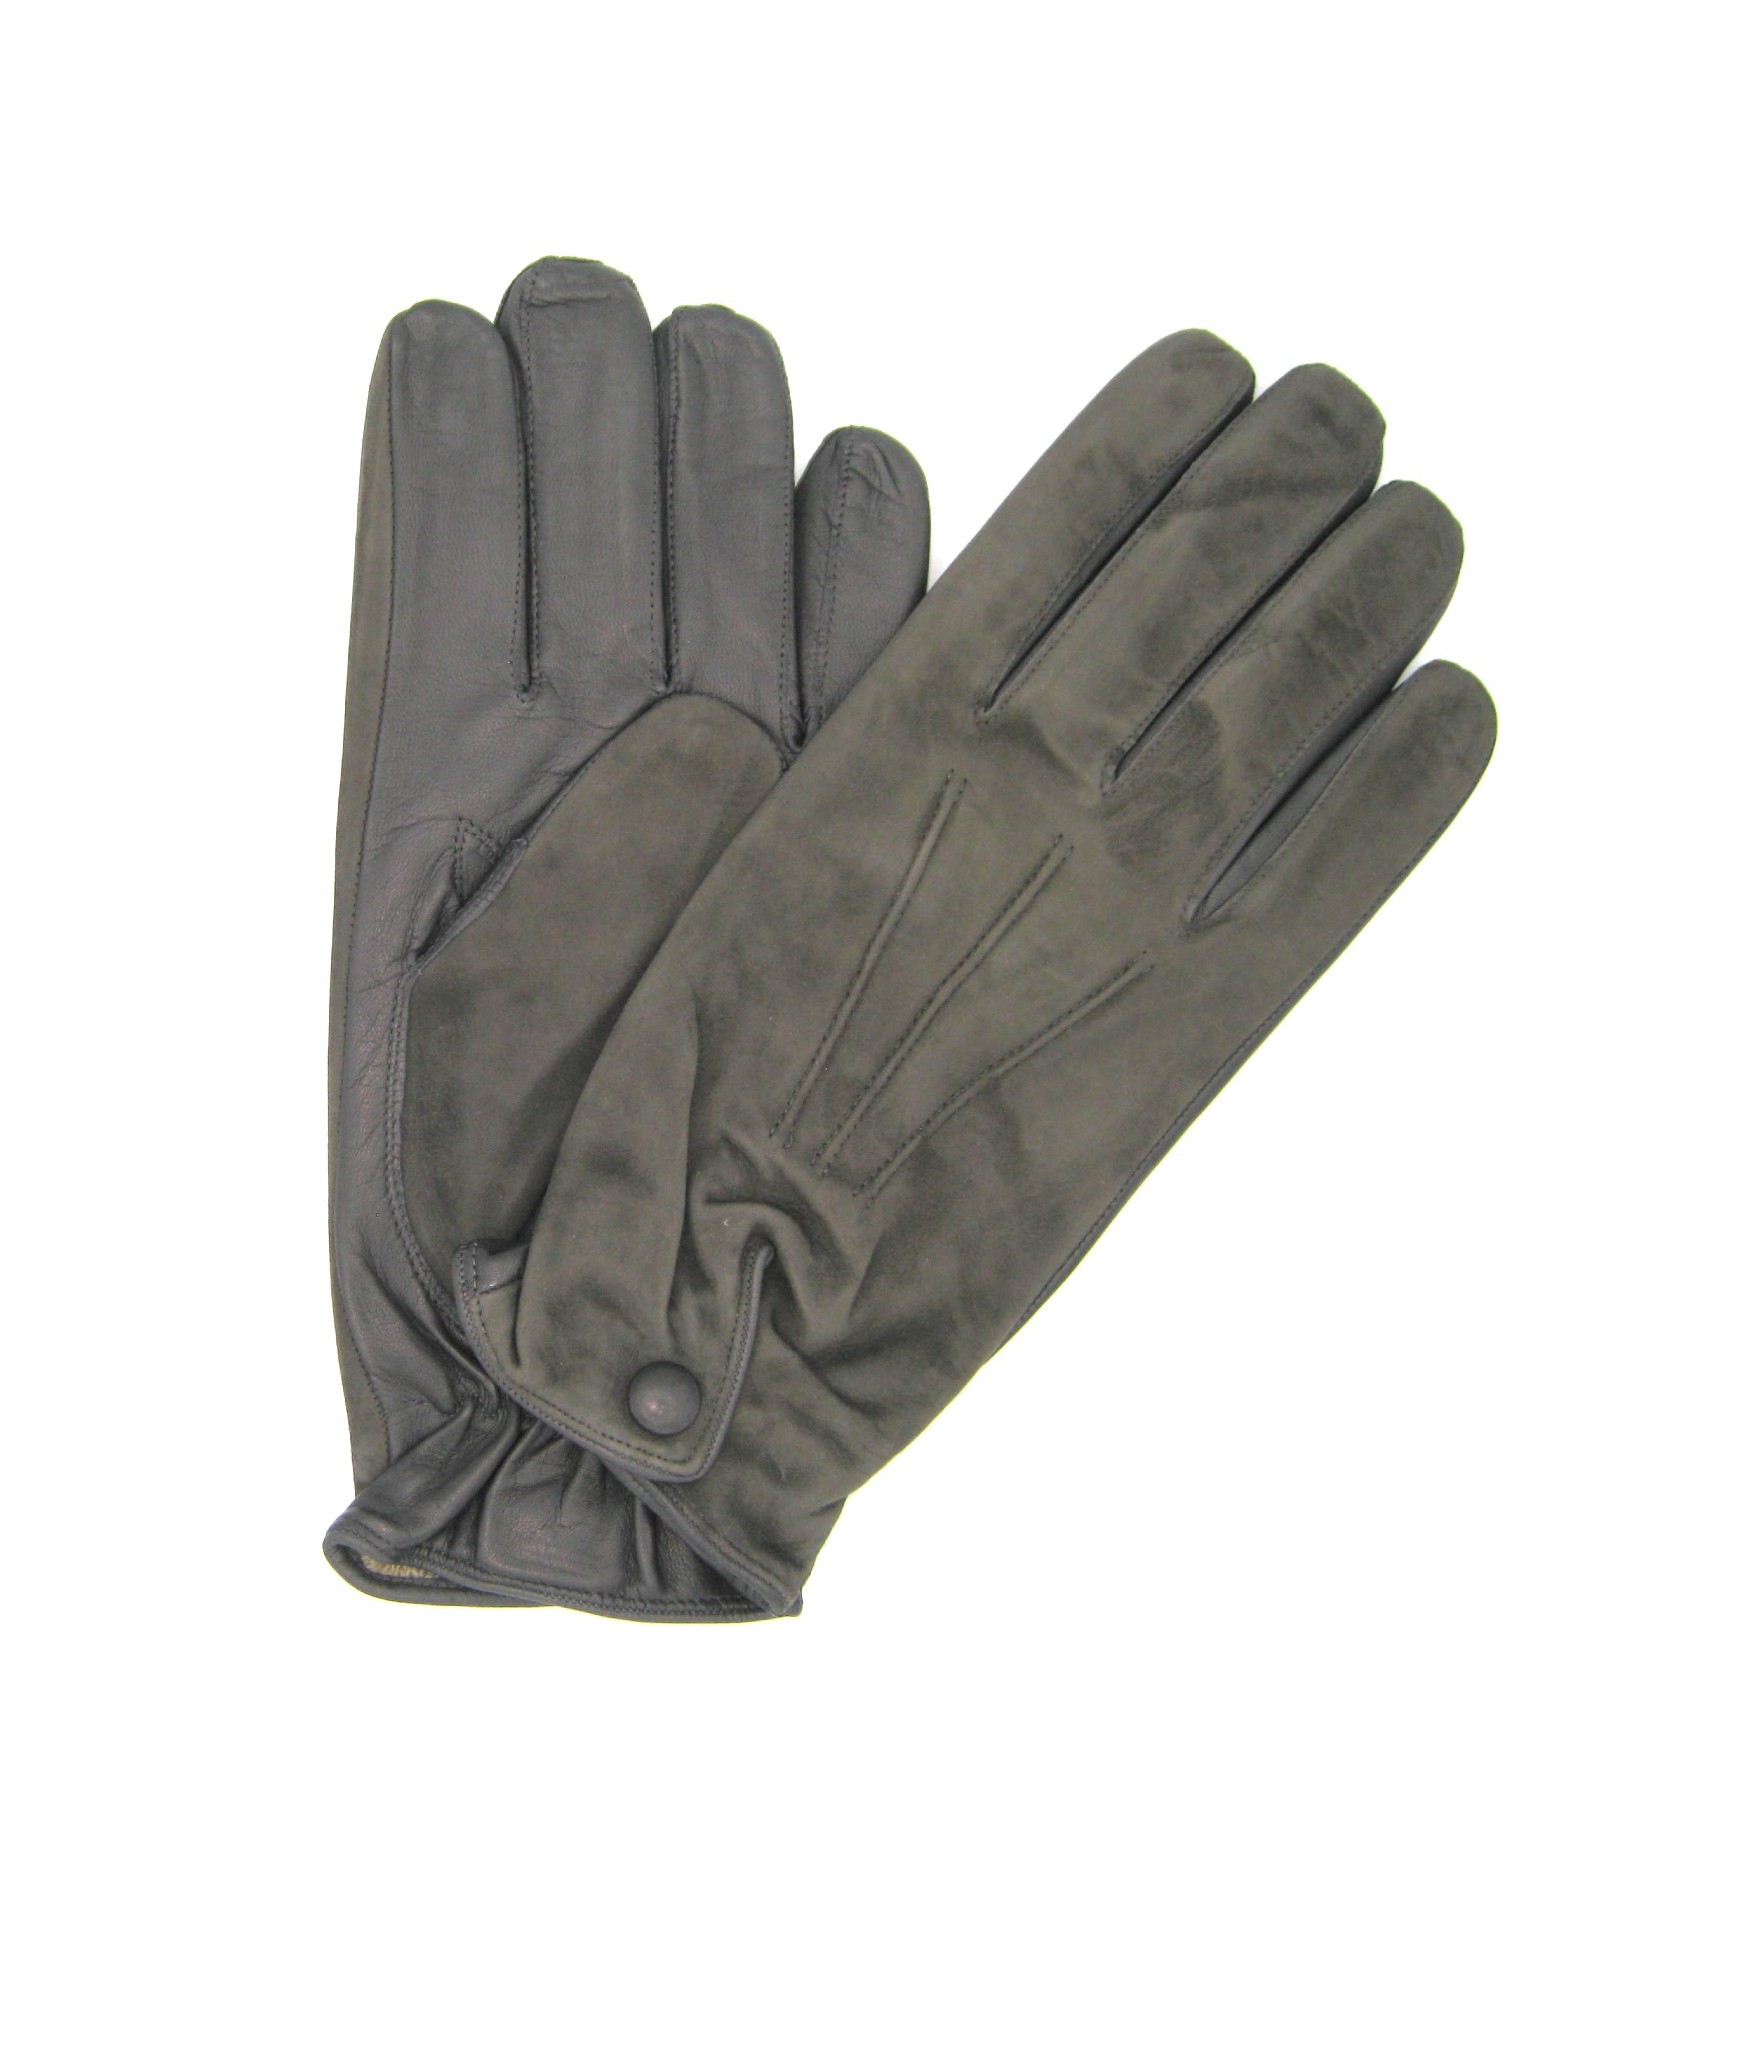 Uomo Fashion Gloves in Nappa and Suede Nappa with button